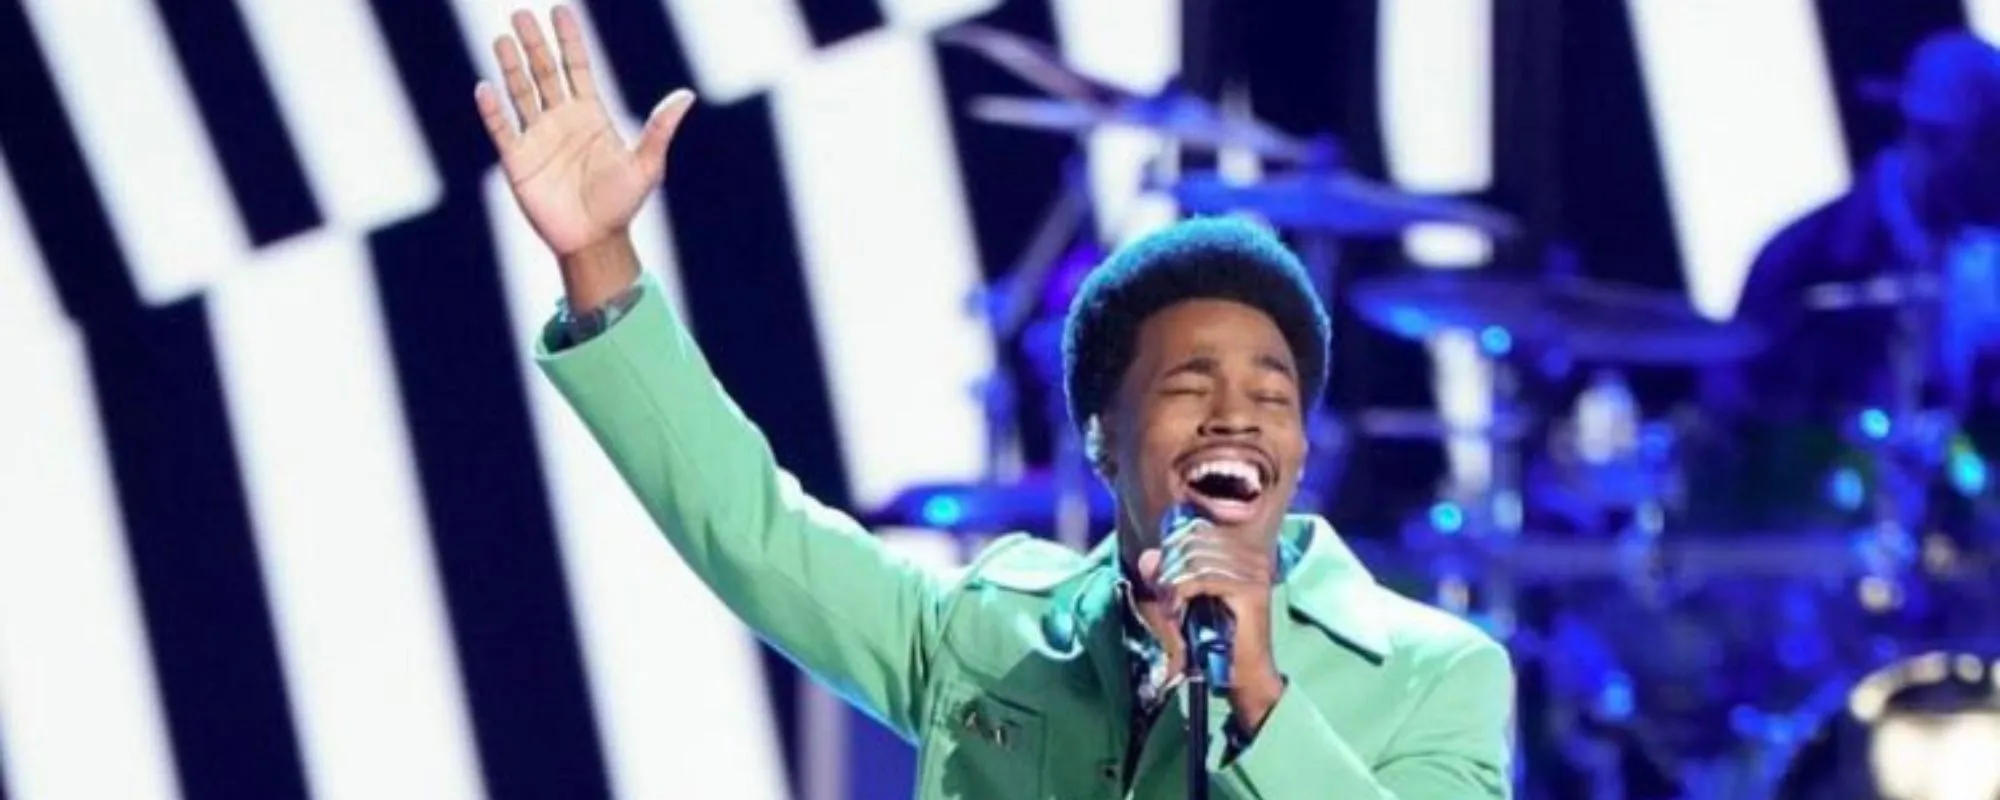 'The Voice' Top 9: Who Won the Instant Save?